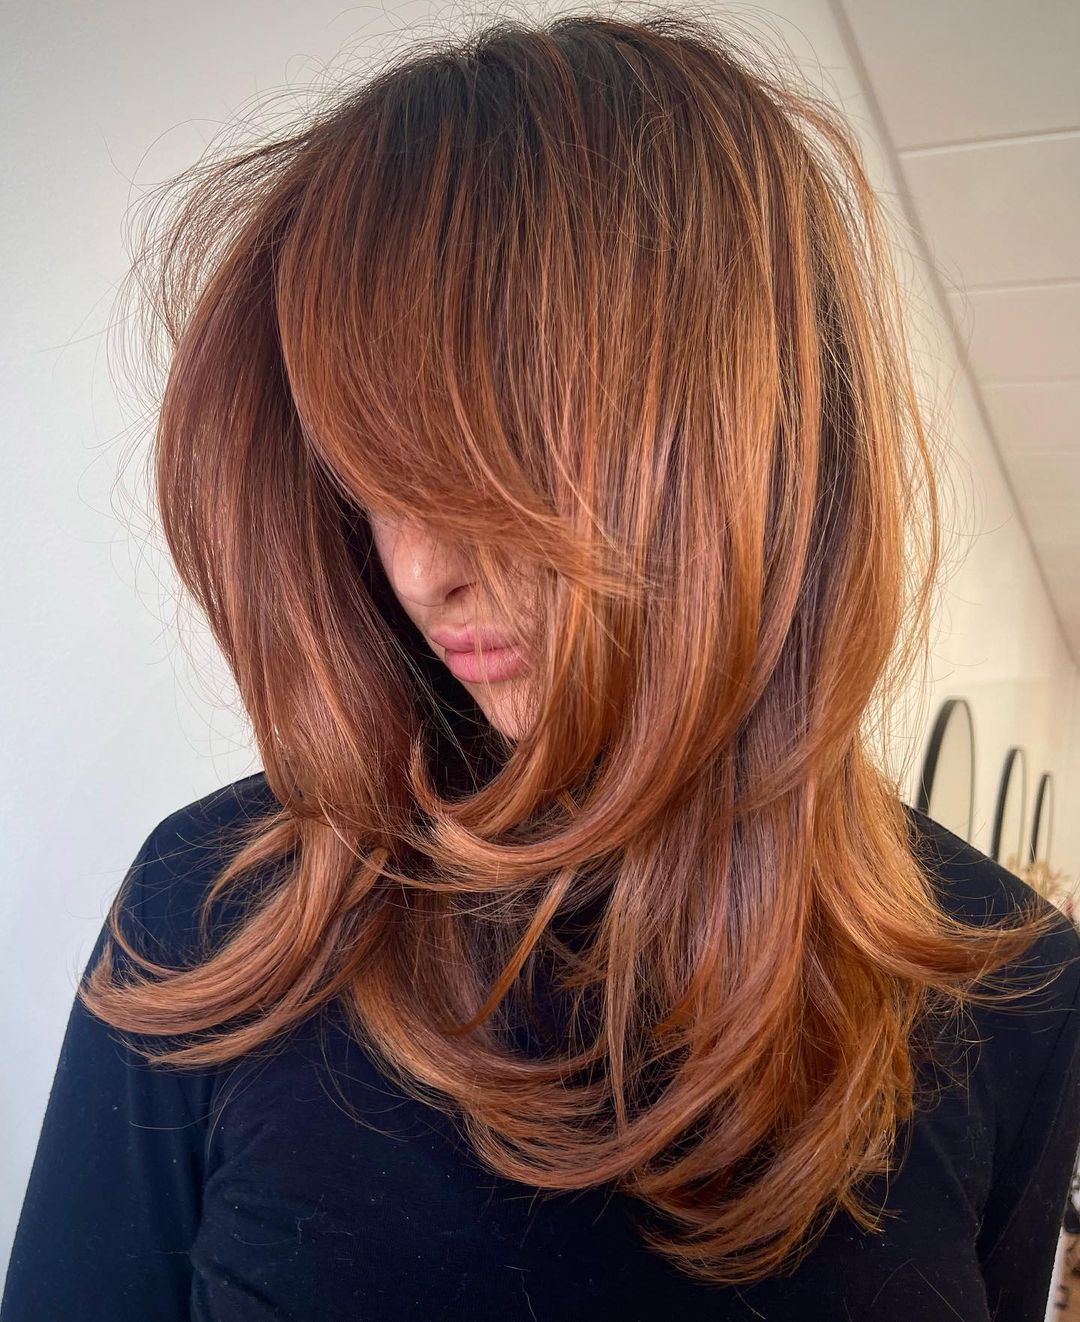 Medium Copper Hair with Layers and Bangs